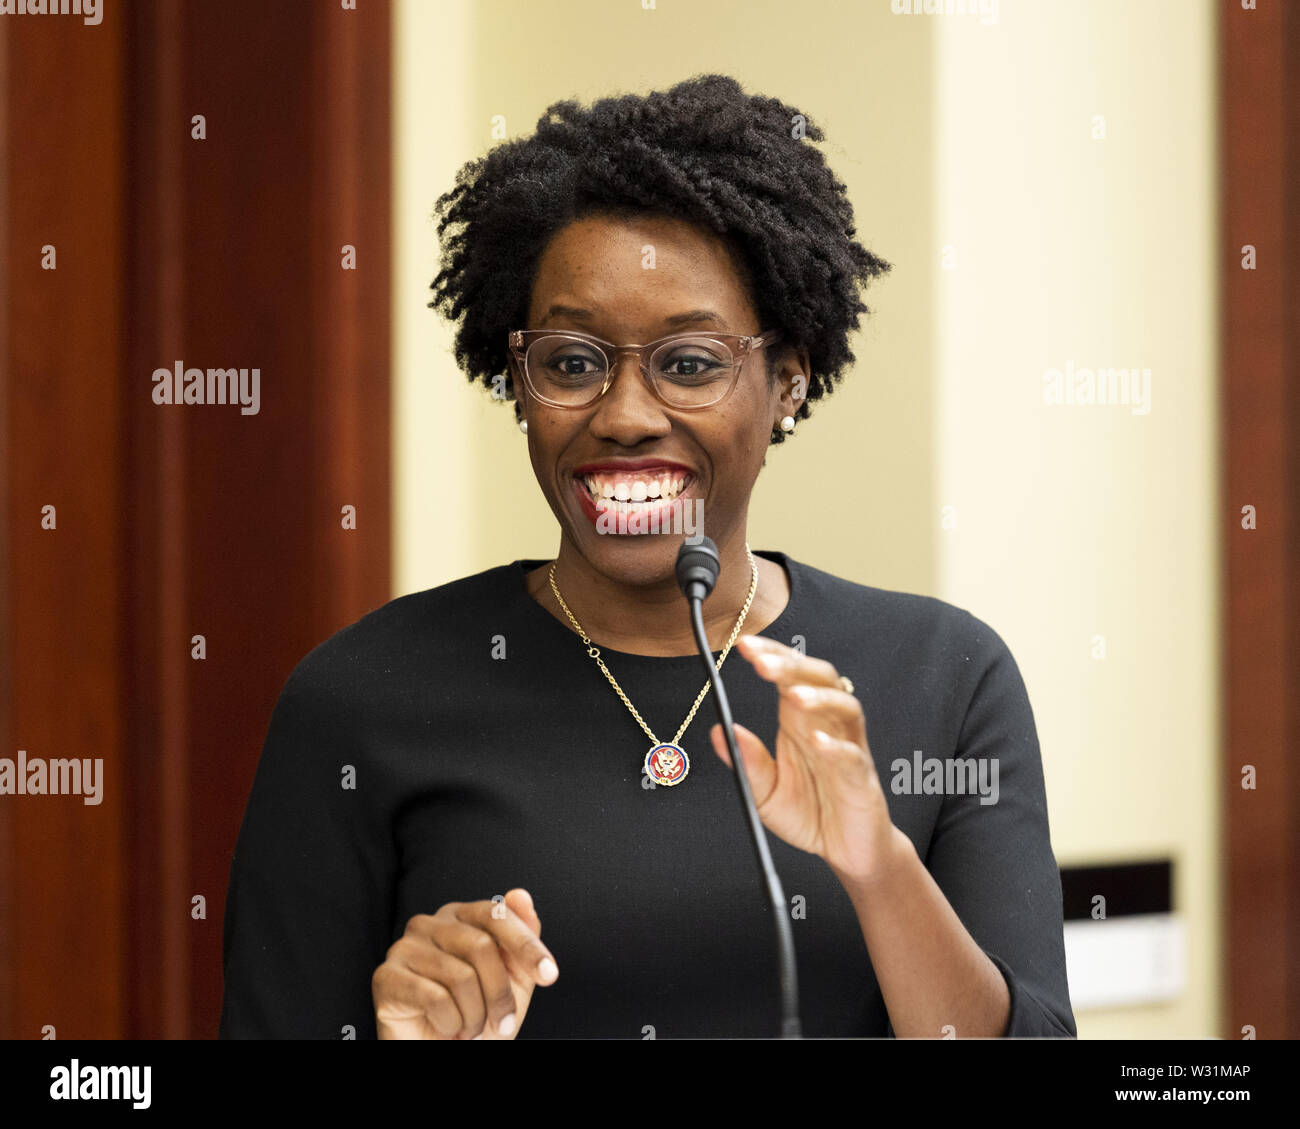 Washington, D.C, USA. 11th July, 2019. U.S. Representative LAUREN UNDERWOOD (D-IL) speaking at the Black Maternal Health Caucus Stakeholder Summit at the Capitol in Washington, DC on July 11, 2019. Credit: Michael Brochstein/ZUMA Wire/Alamy Live News Stock Photo